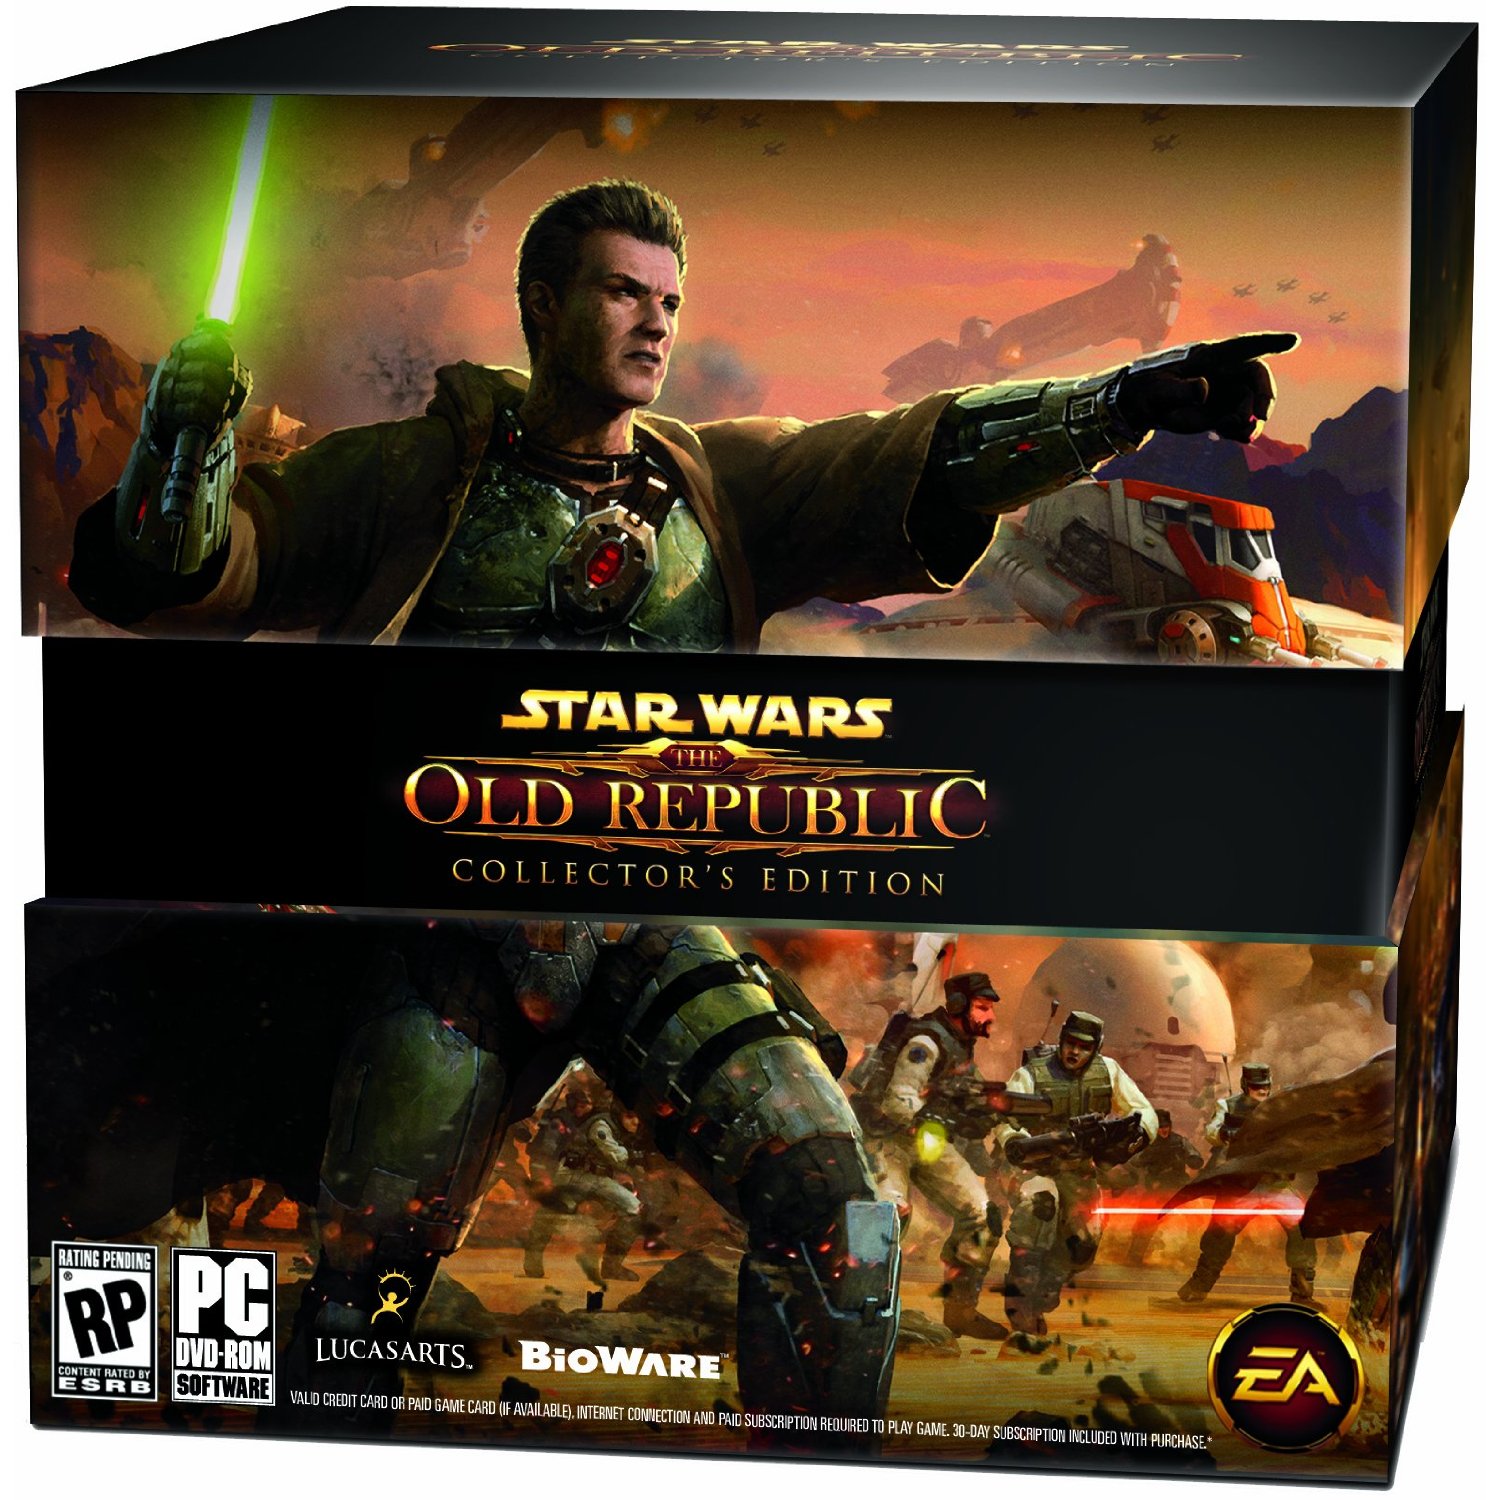 http://thetechjournal.com/wp-content/uploads/images/1107/1312112025-star-wars-the-old-republic--pc-game-available-for-preorder-now-1.jpg